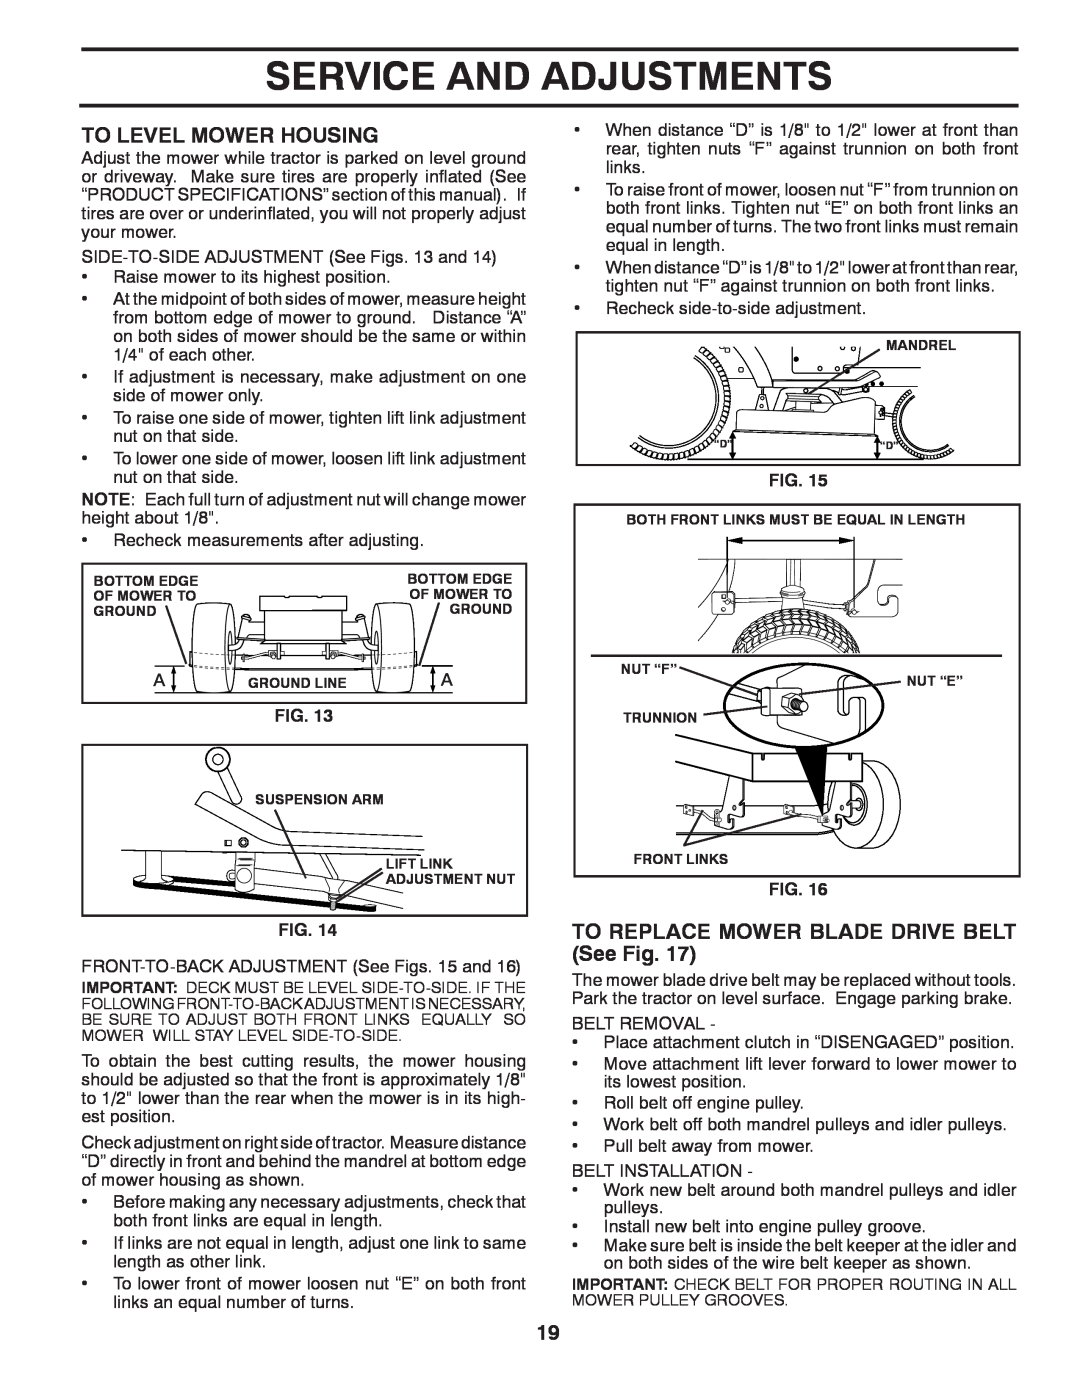 Poulan PP14538 manual To Level Mower Housing, TO REPLACE MOWER BLADE DRIVE BELT See Fig, Service And Adjustments 